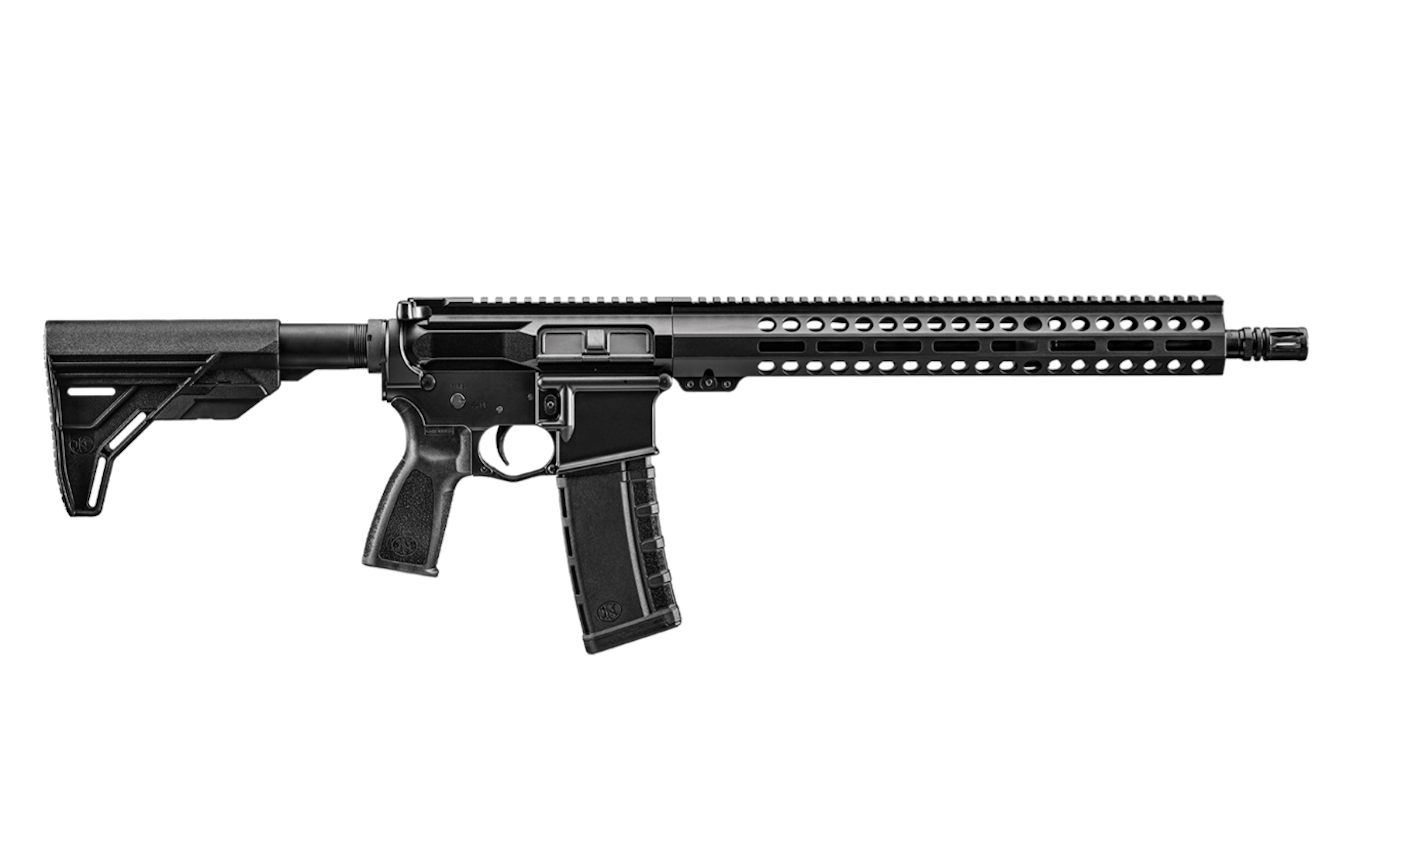 FN Adds NEW Slick-side Guardian to FN 15 Rifle Series